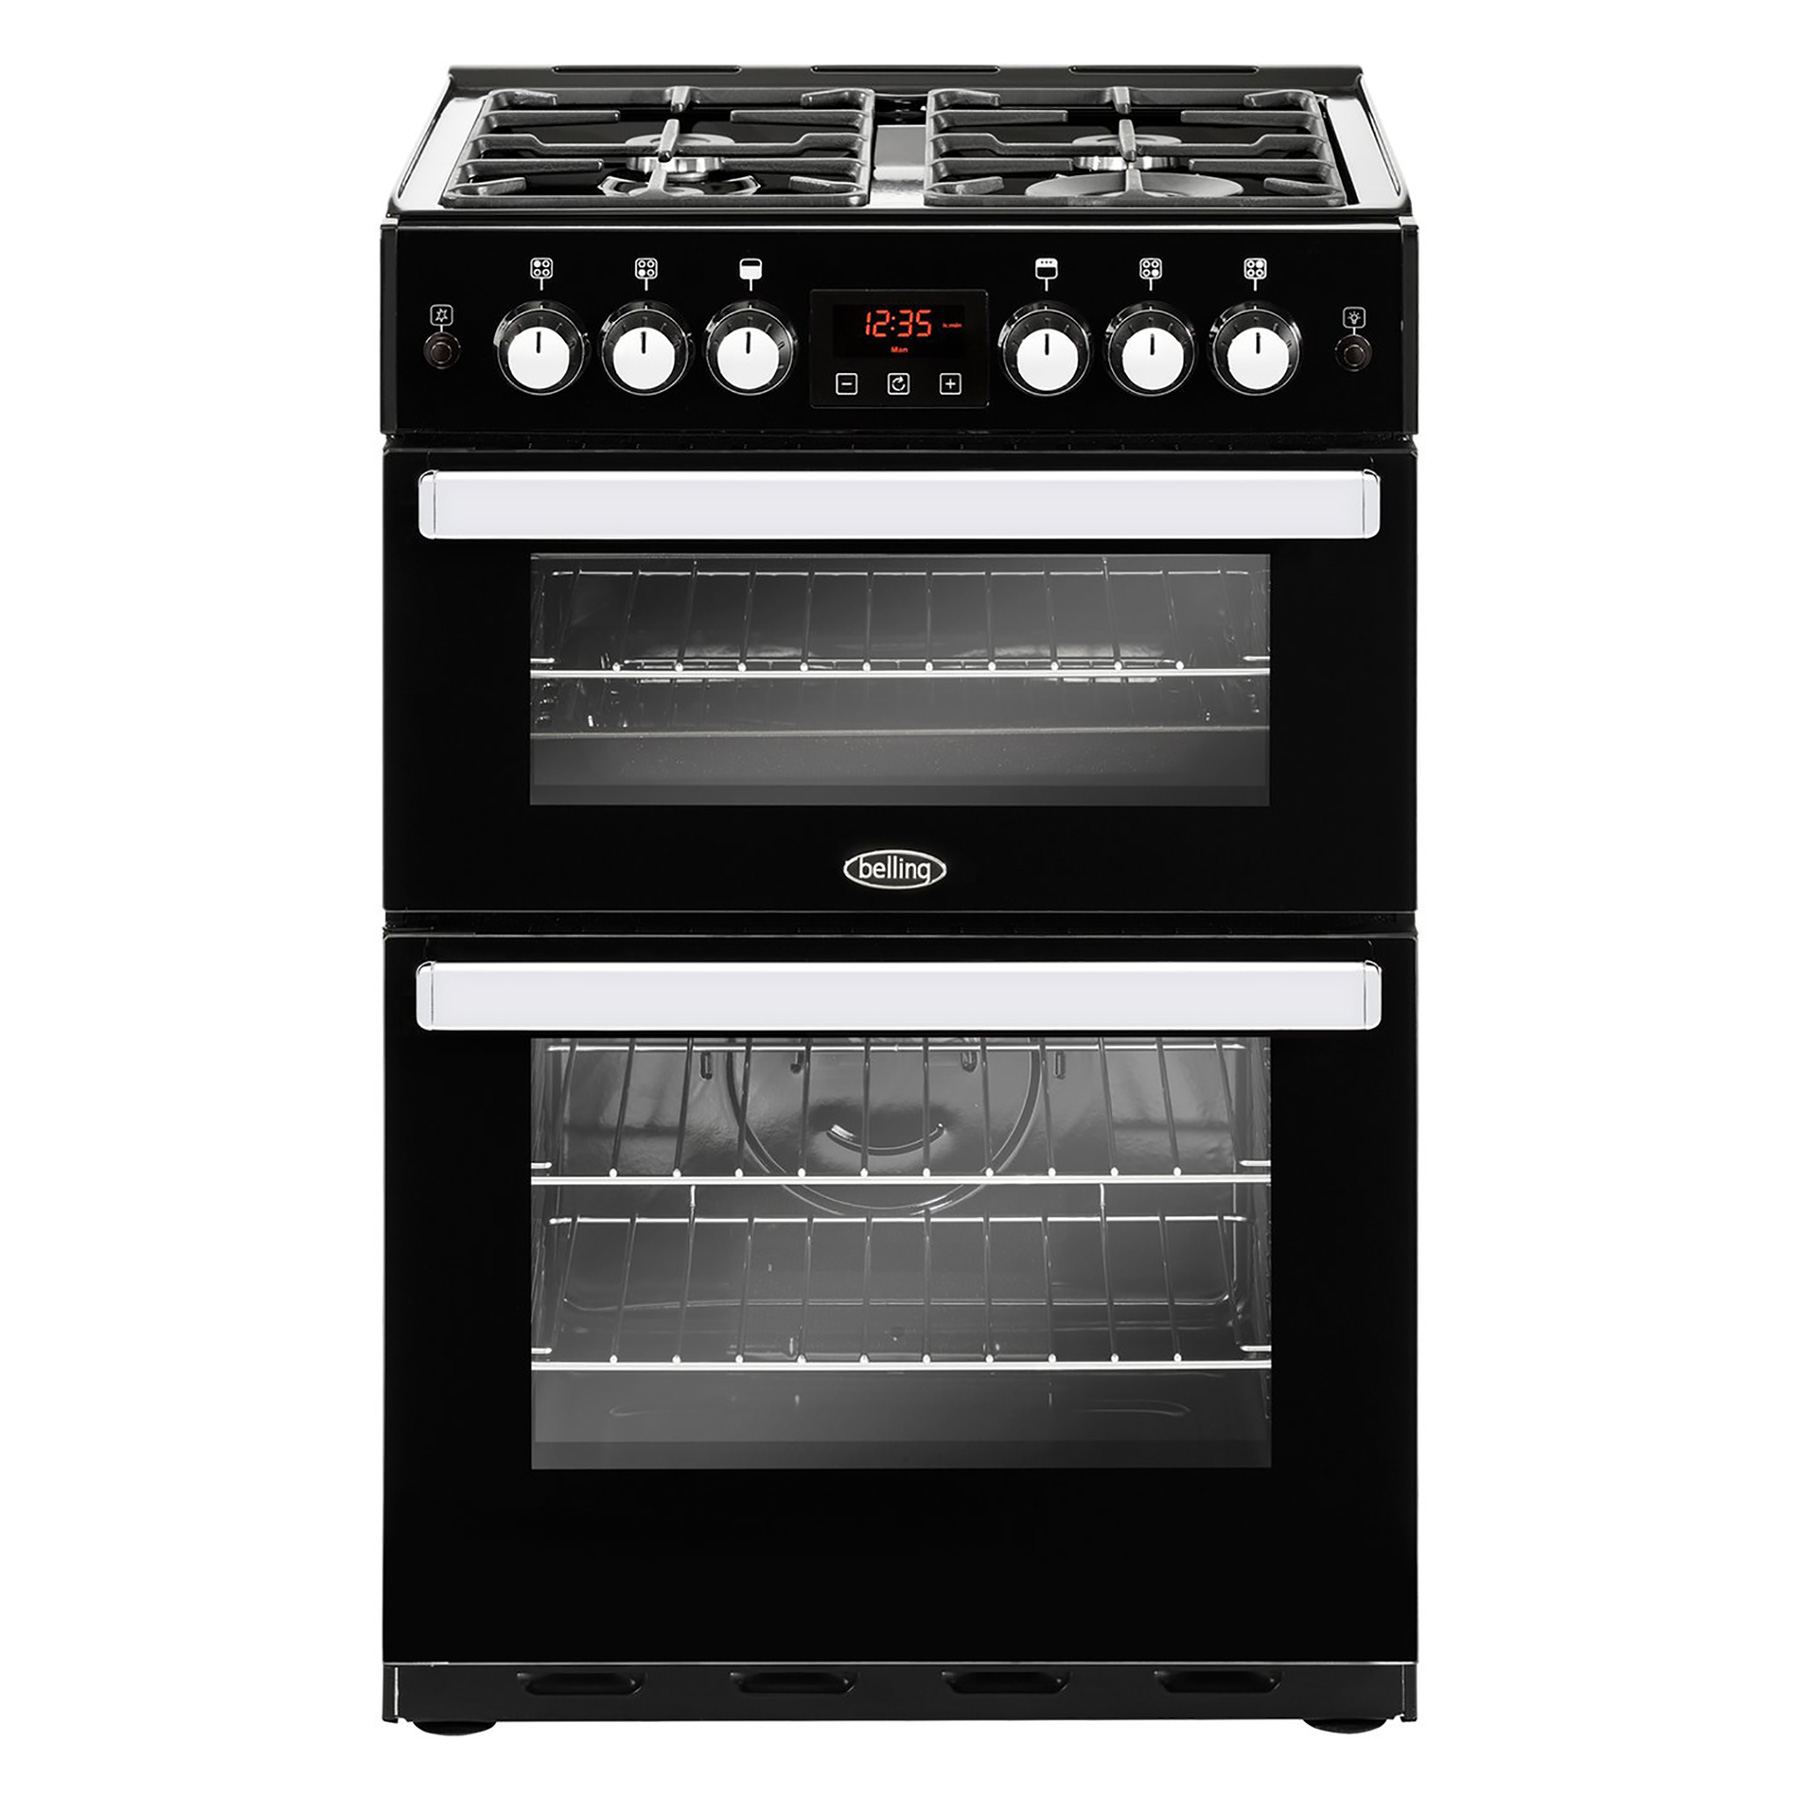 Image of Belling 444410824 60cm Cookcentre 60G Double Oven Gas Cooker in Black